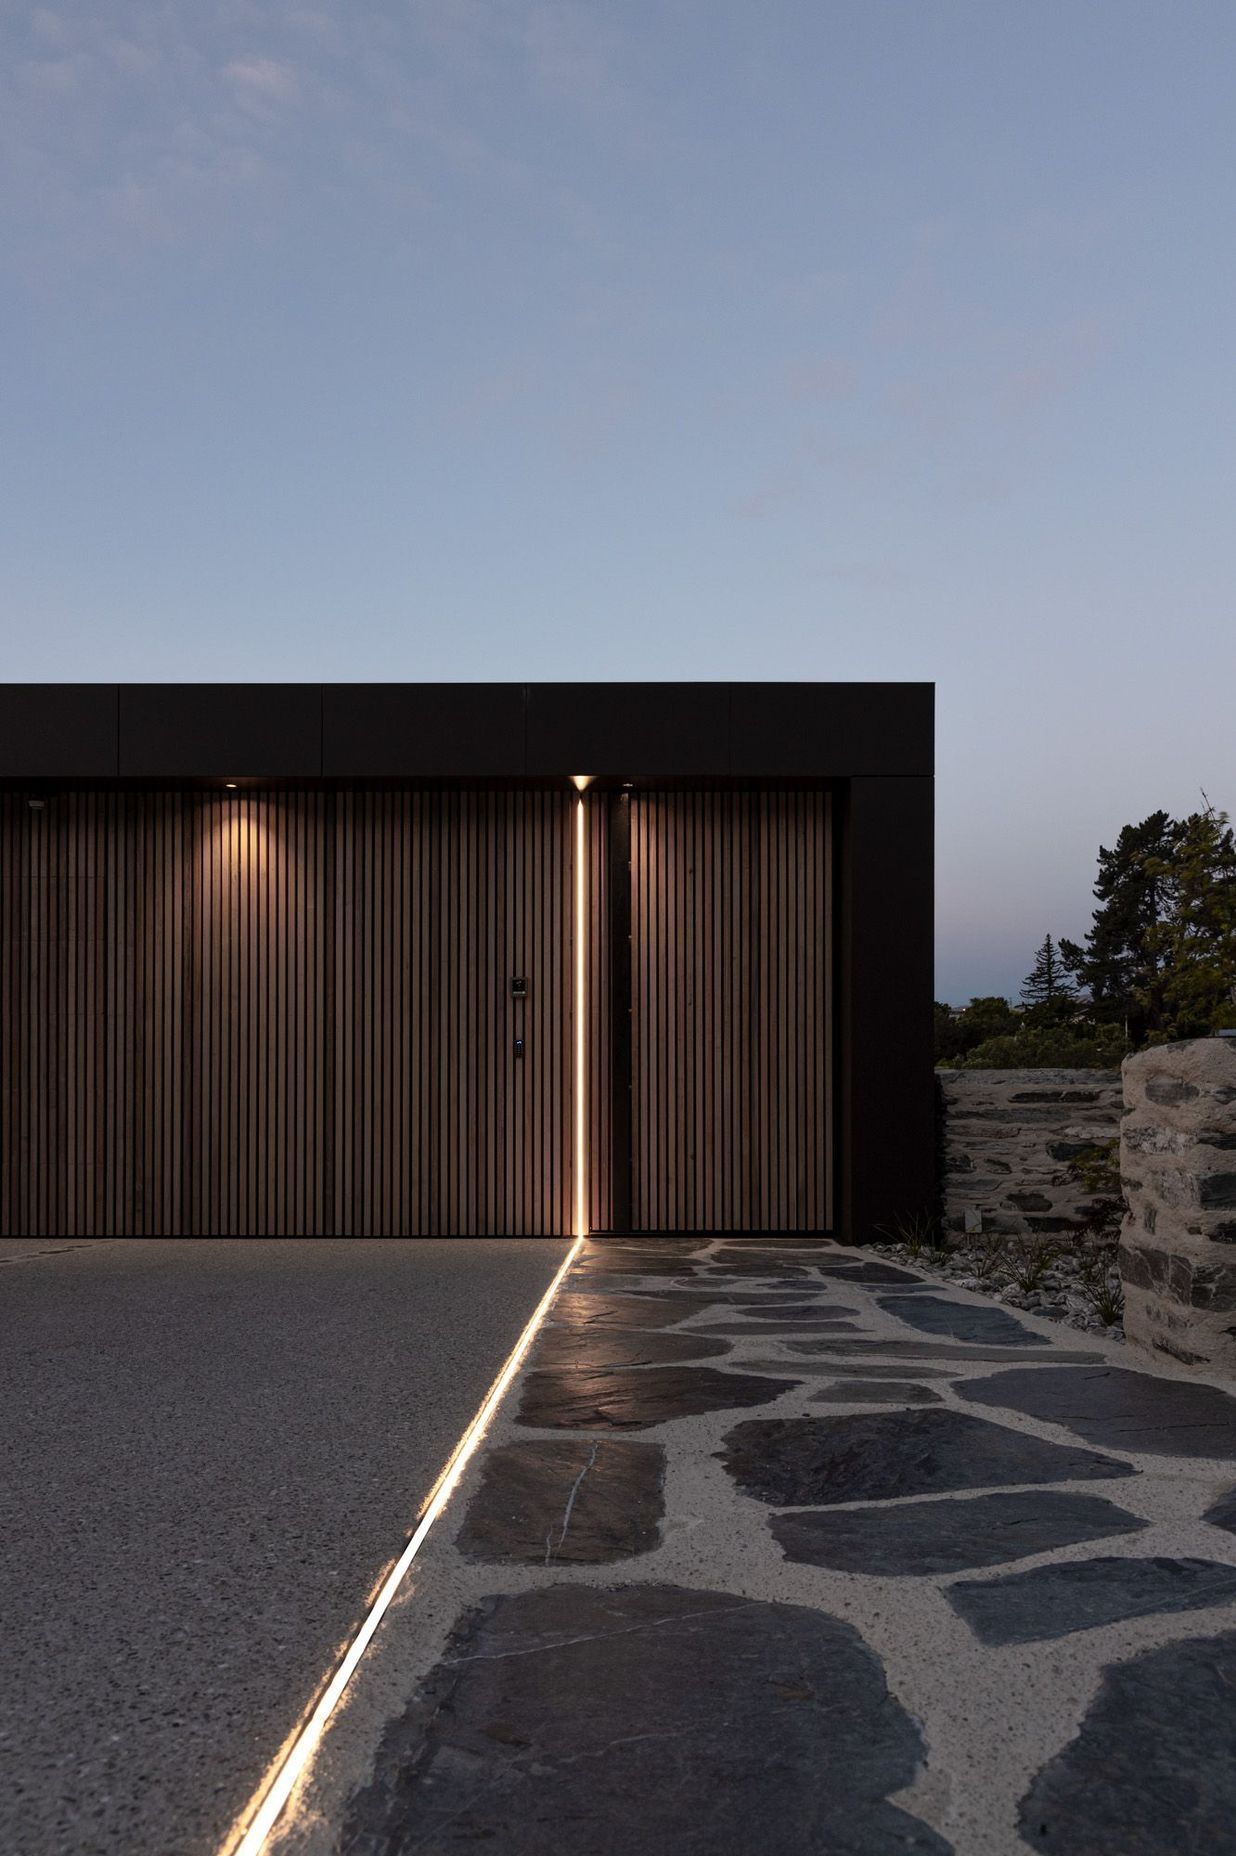 At night, a saber of light travels down the discreet garage doors and along the entry pathway.